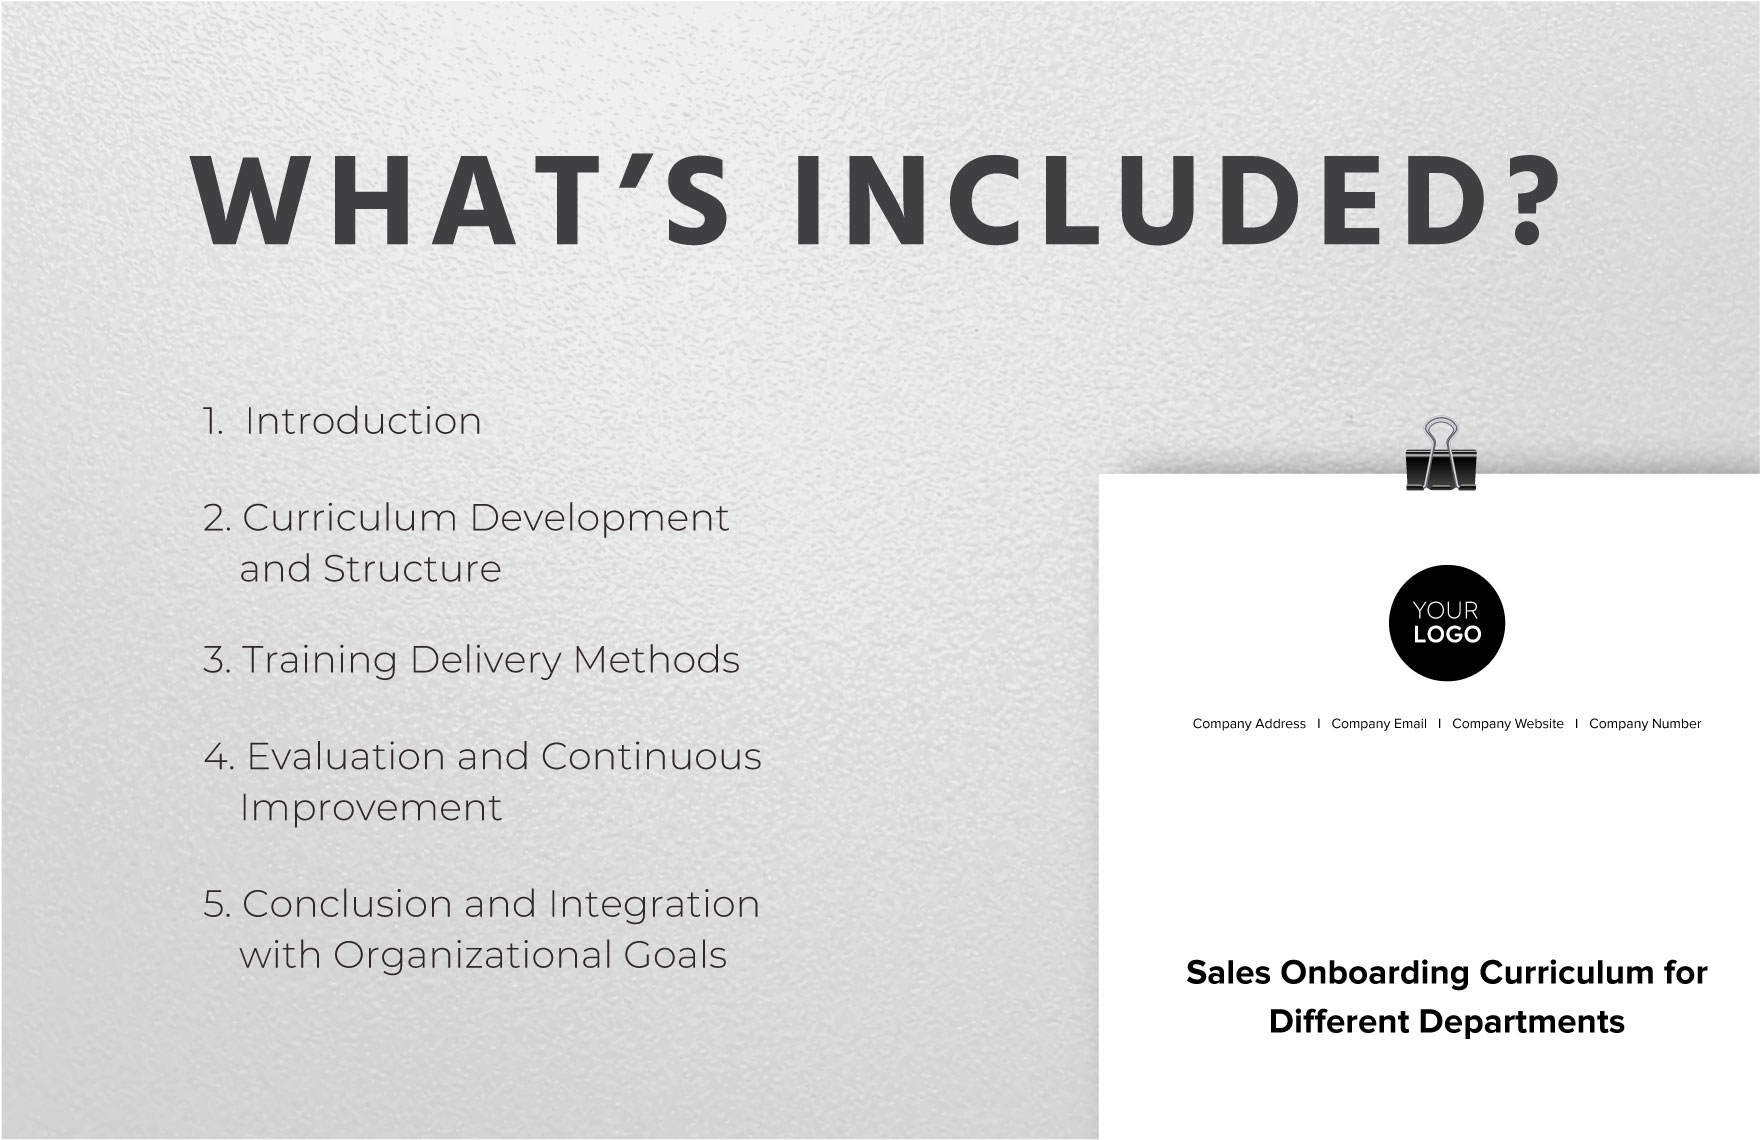 Sales Onboarding Curriculum for Different Departments Template